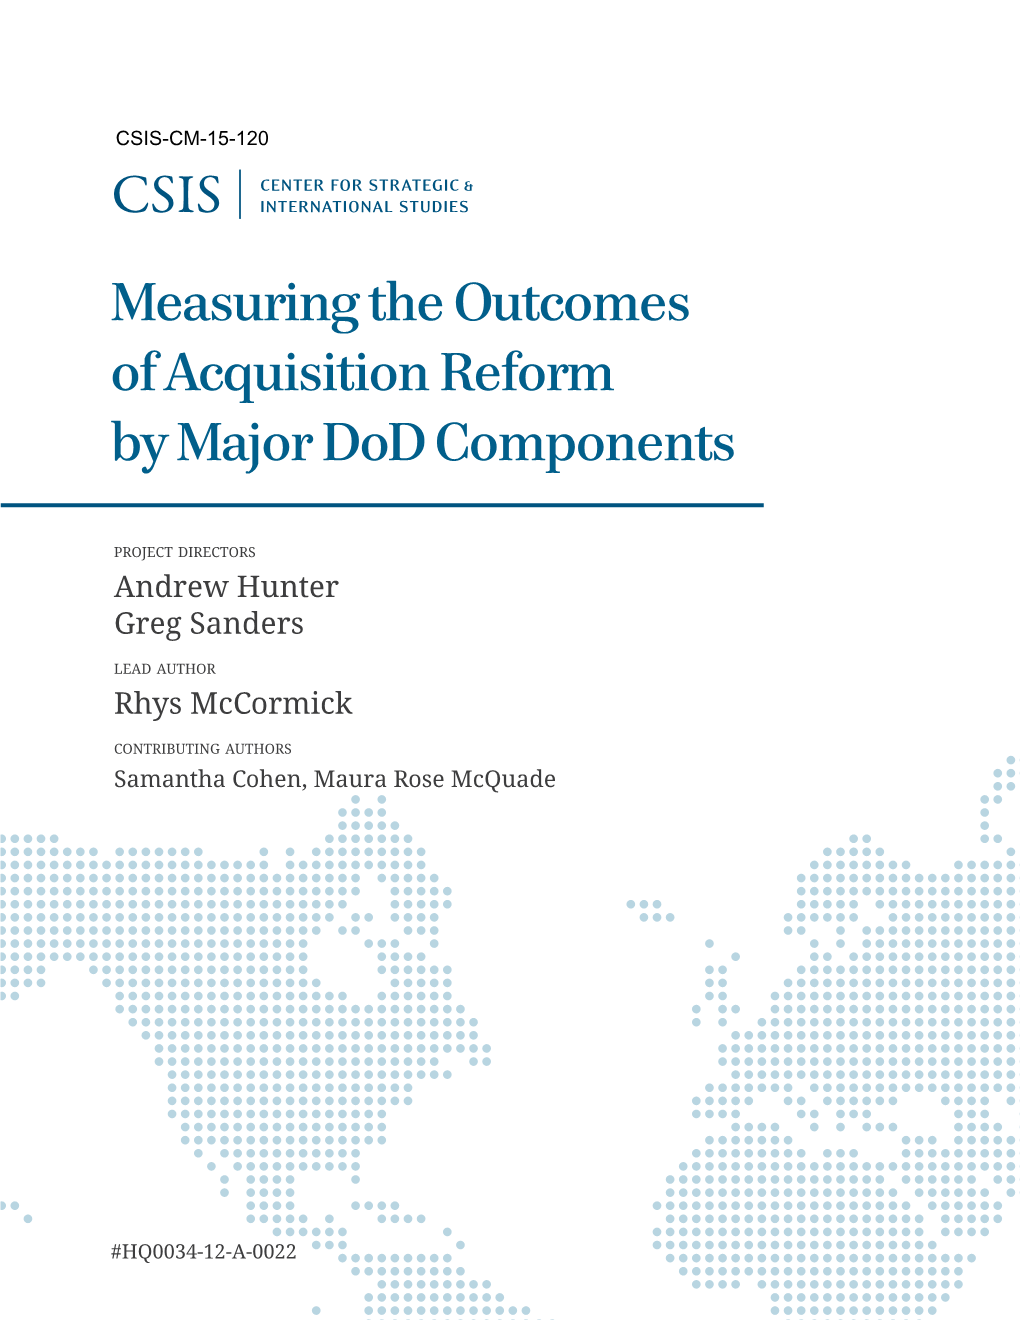 Measuring the Success of Acquisition Reform by Major Dod Components